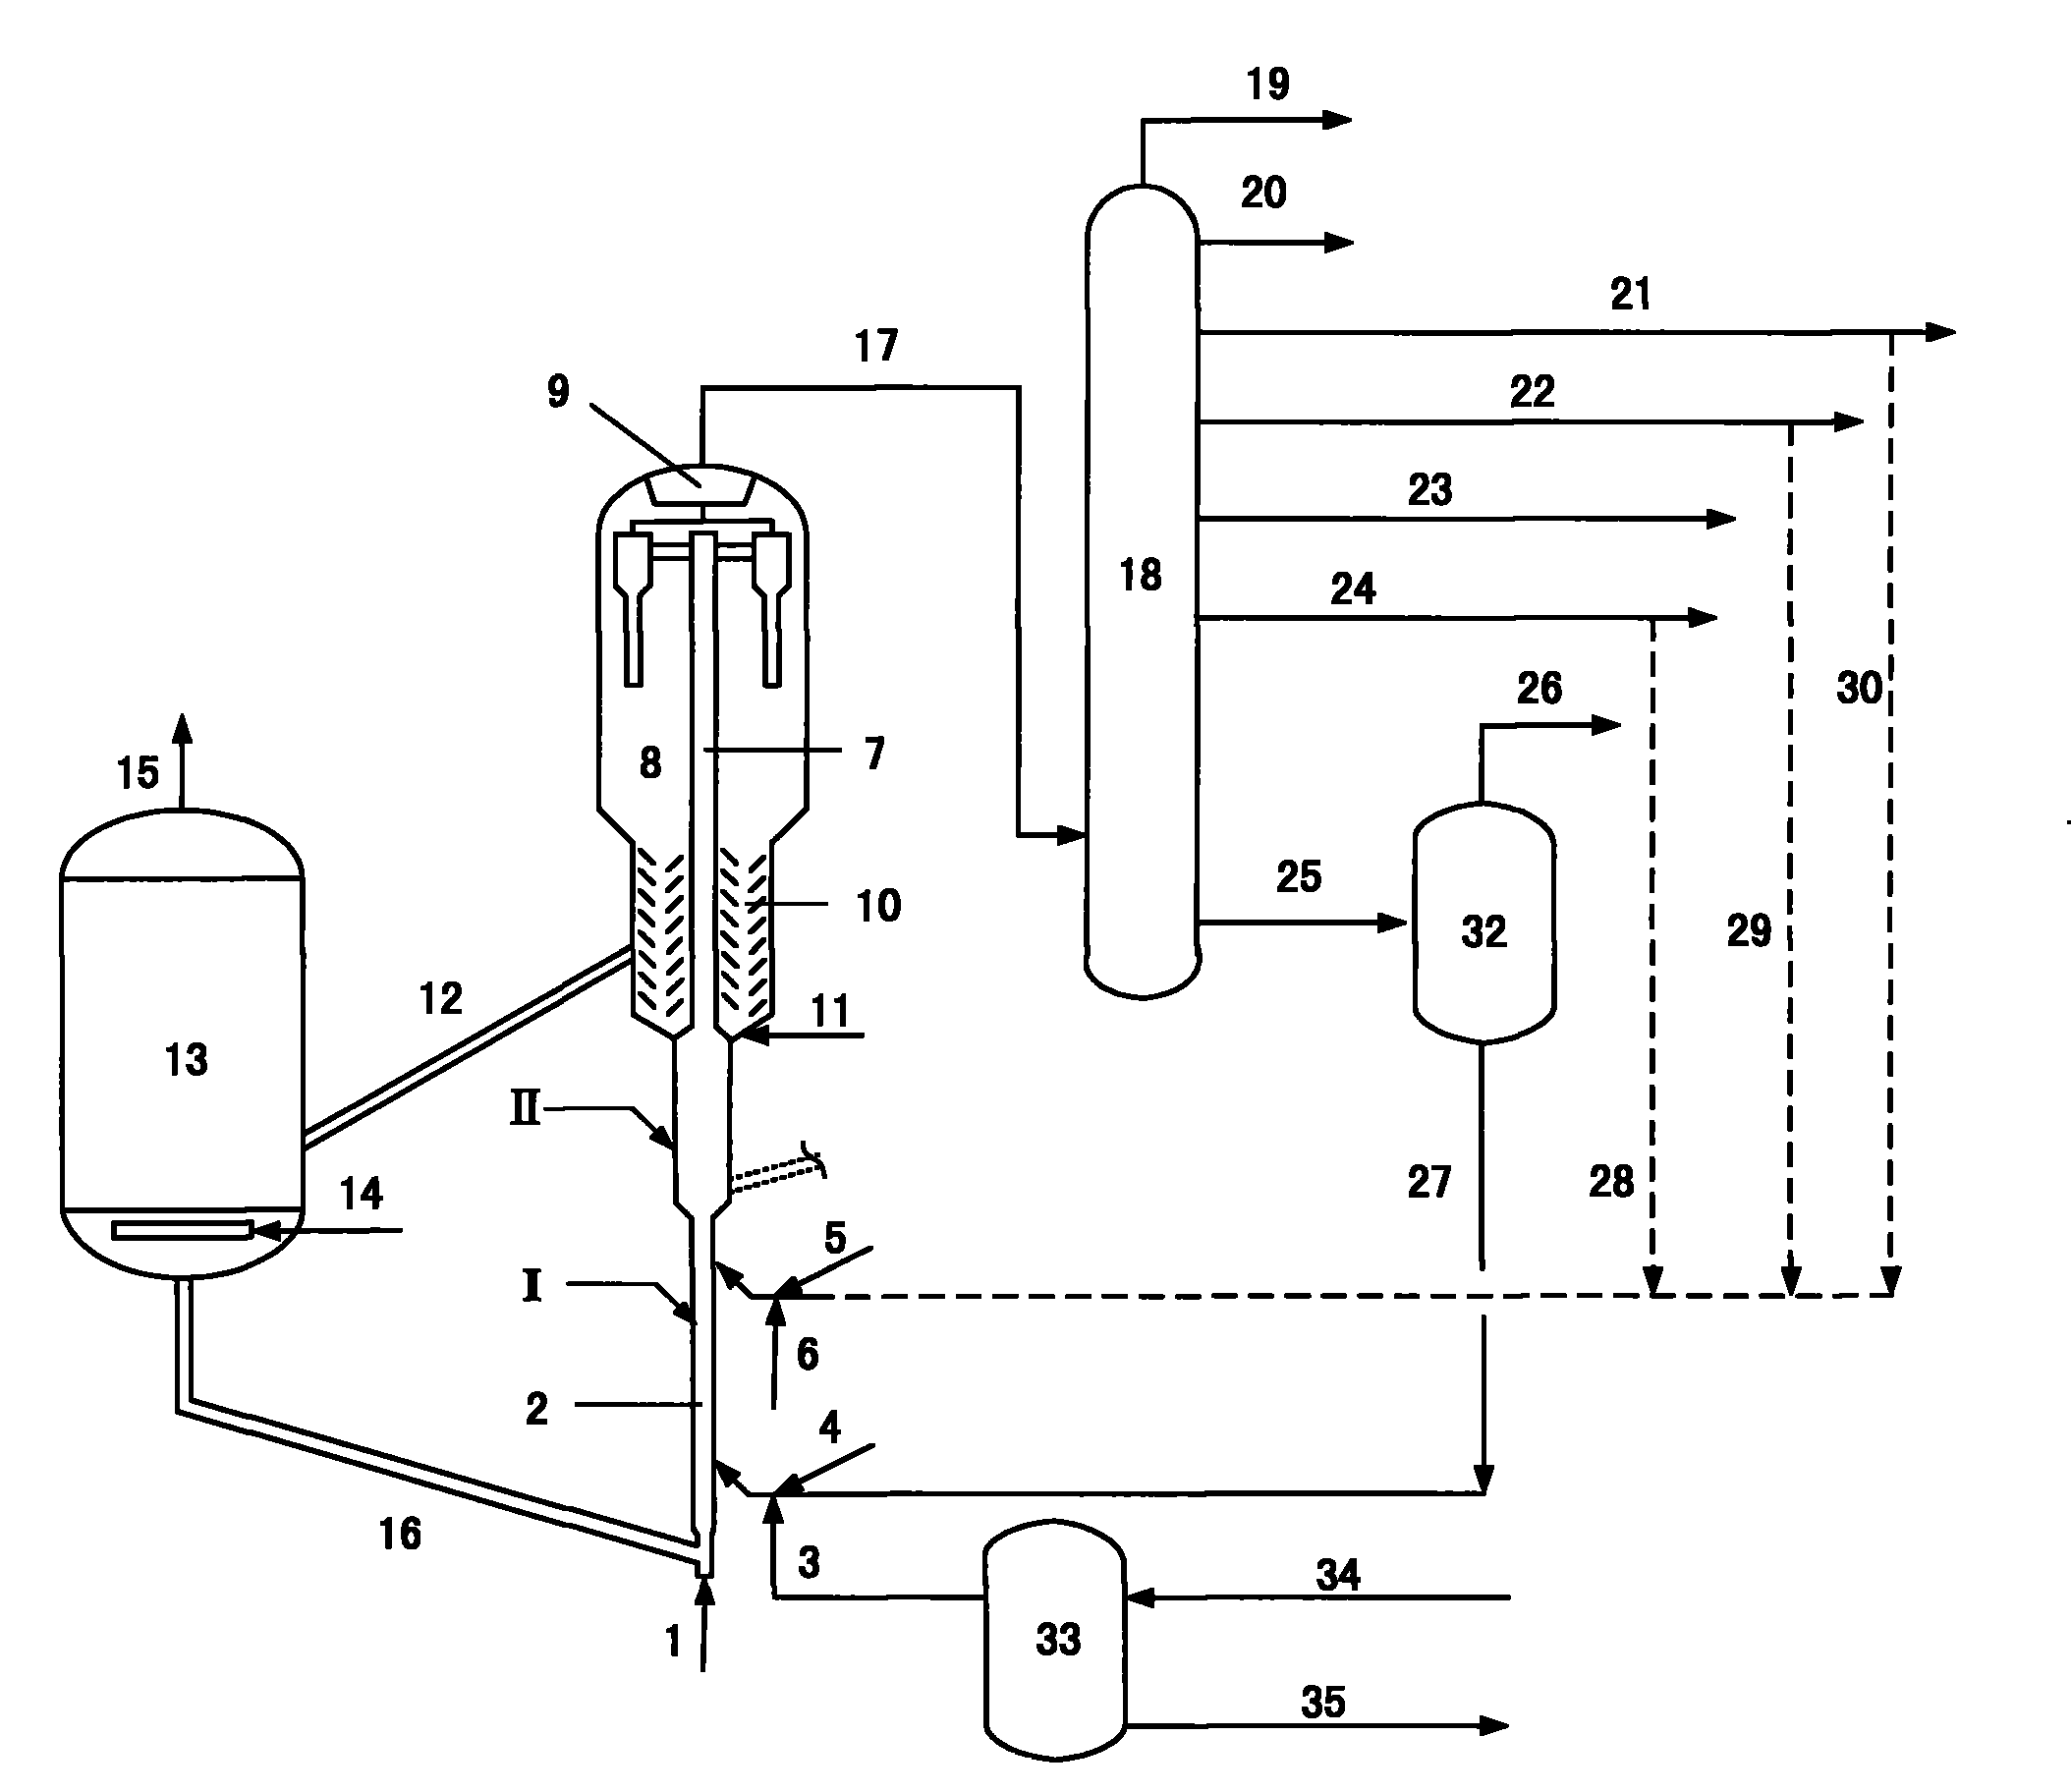 Method for processing inferior crude oil through combined processes